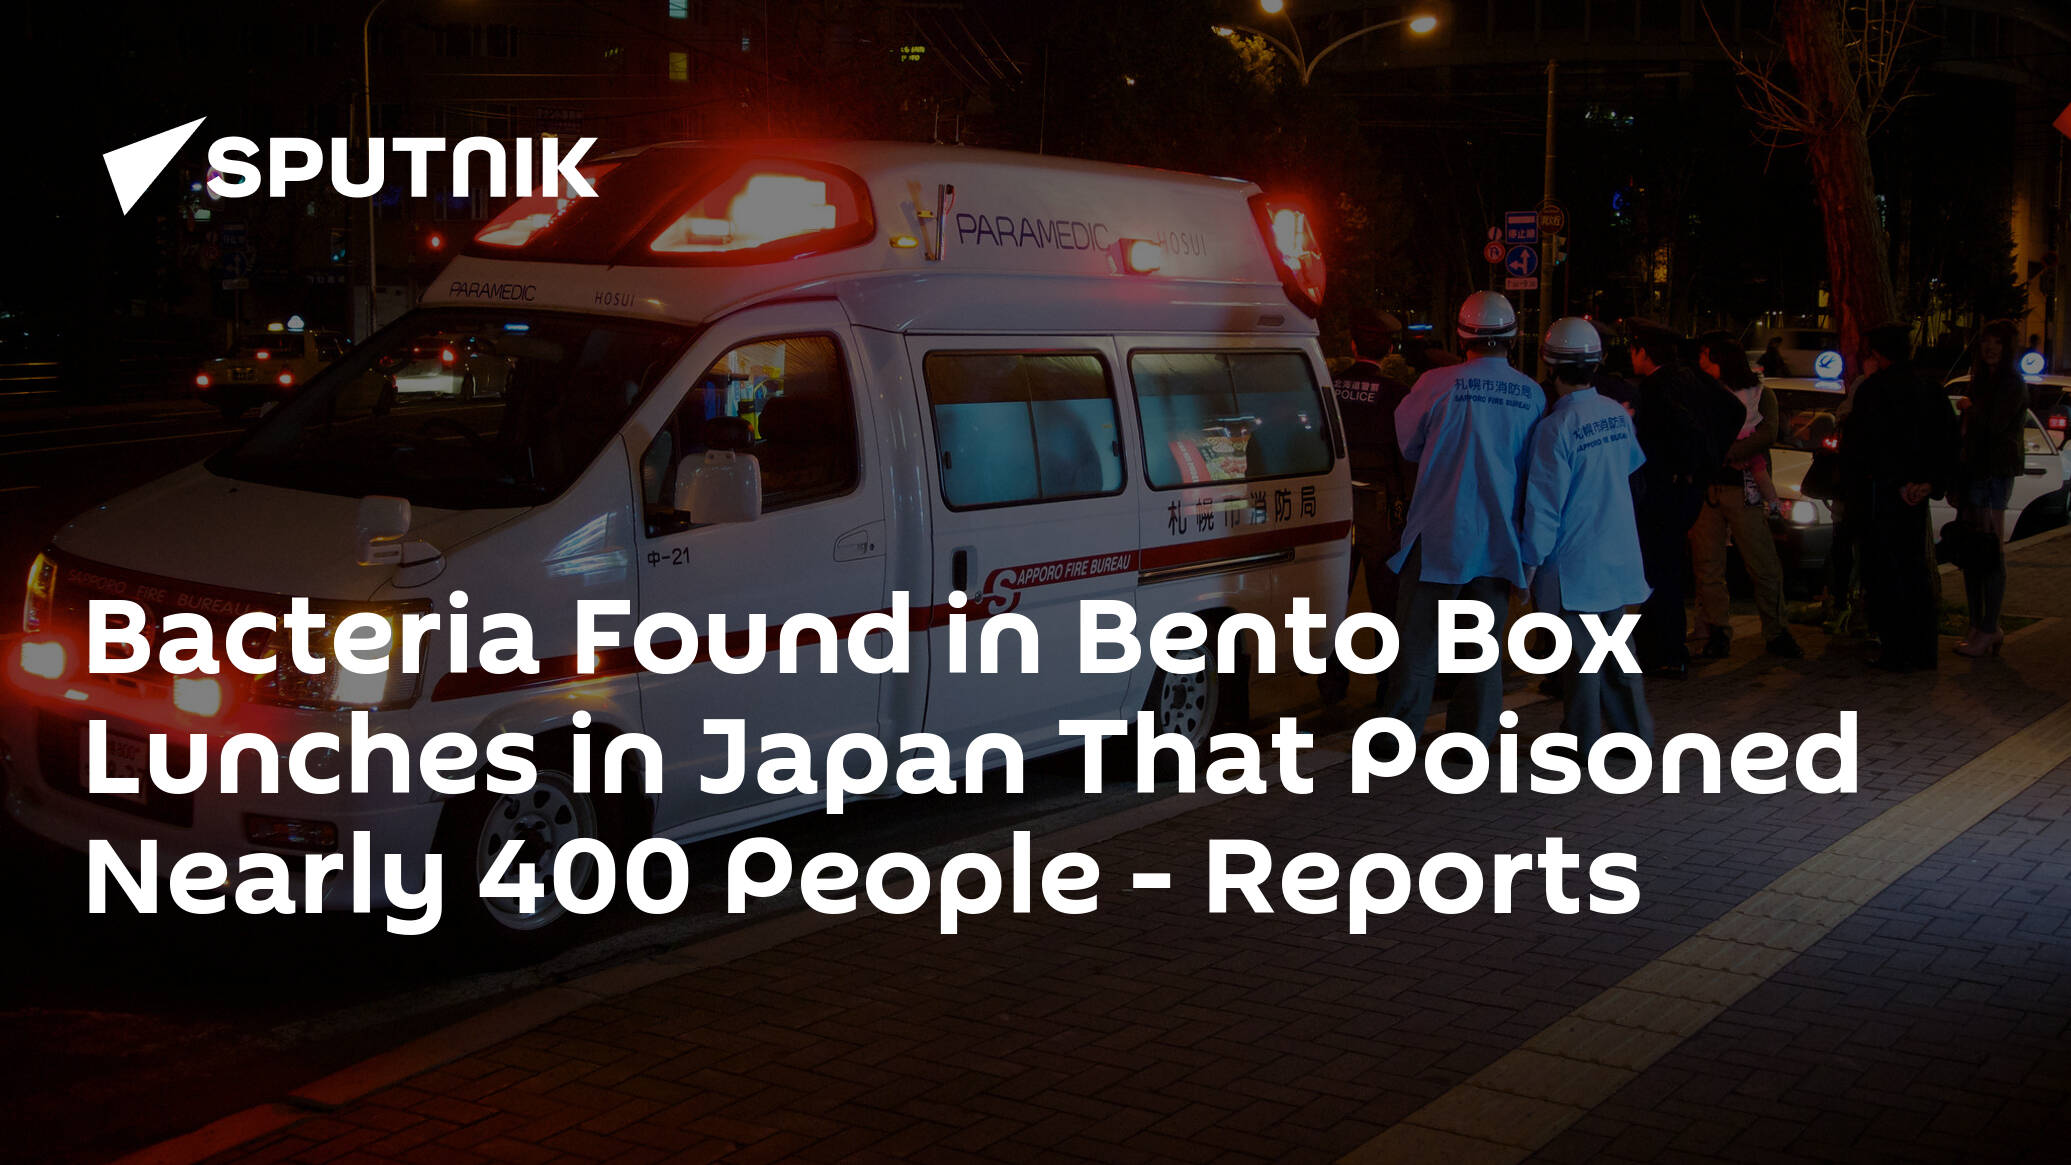 Bacteria Found in Bento Box Lunches in Japan That Poisoned Nearly 400 People – Reports